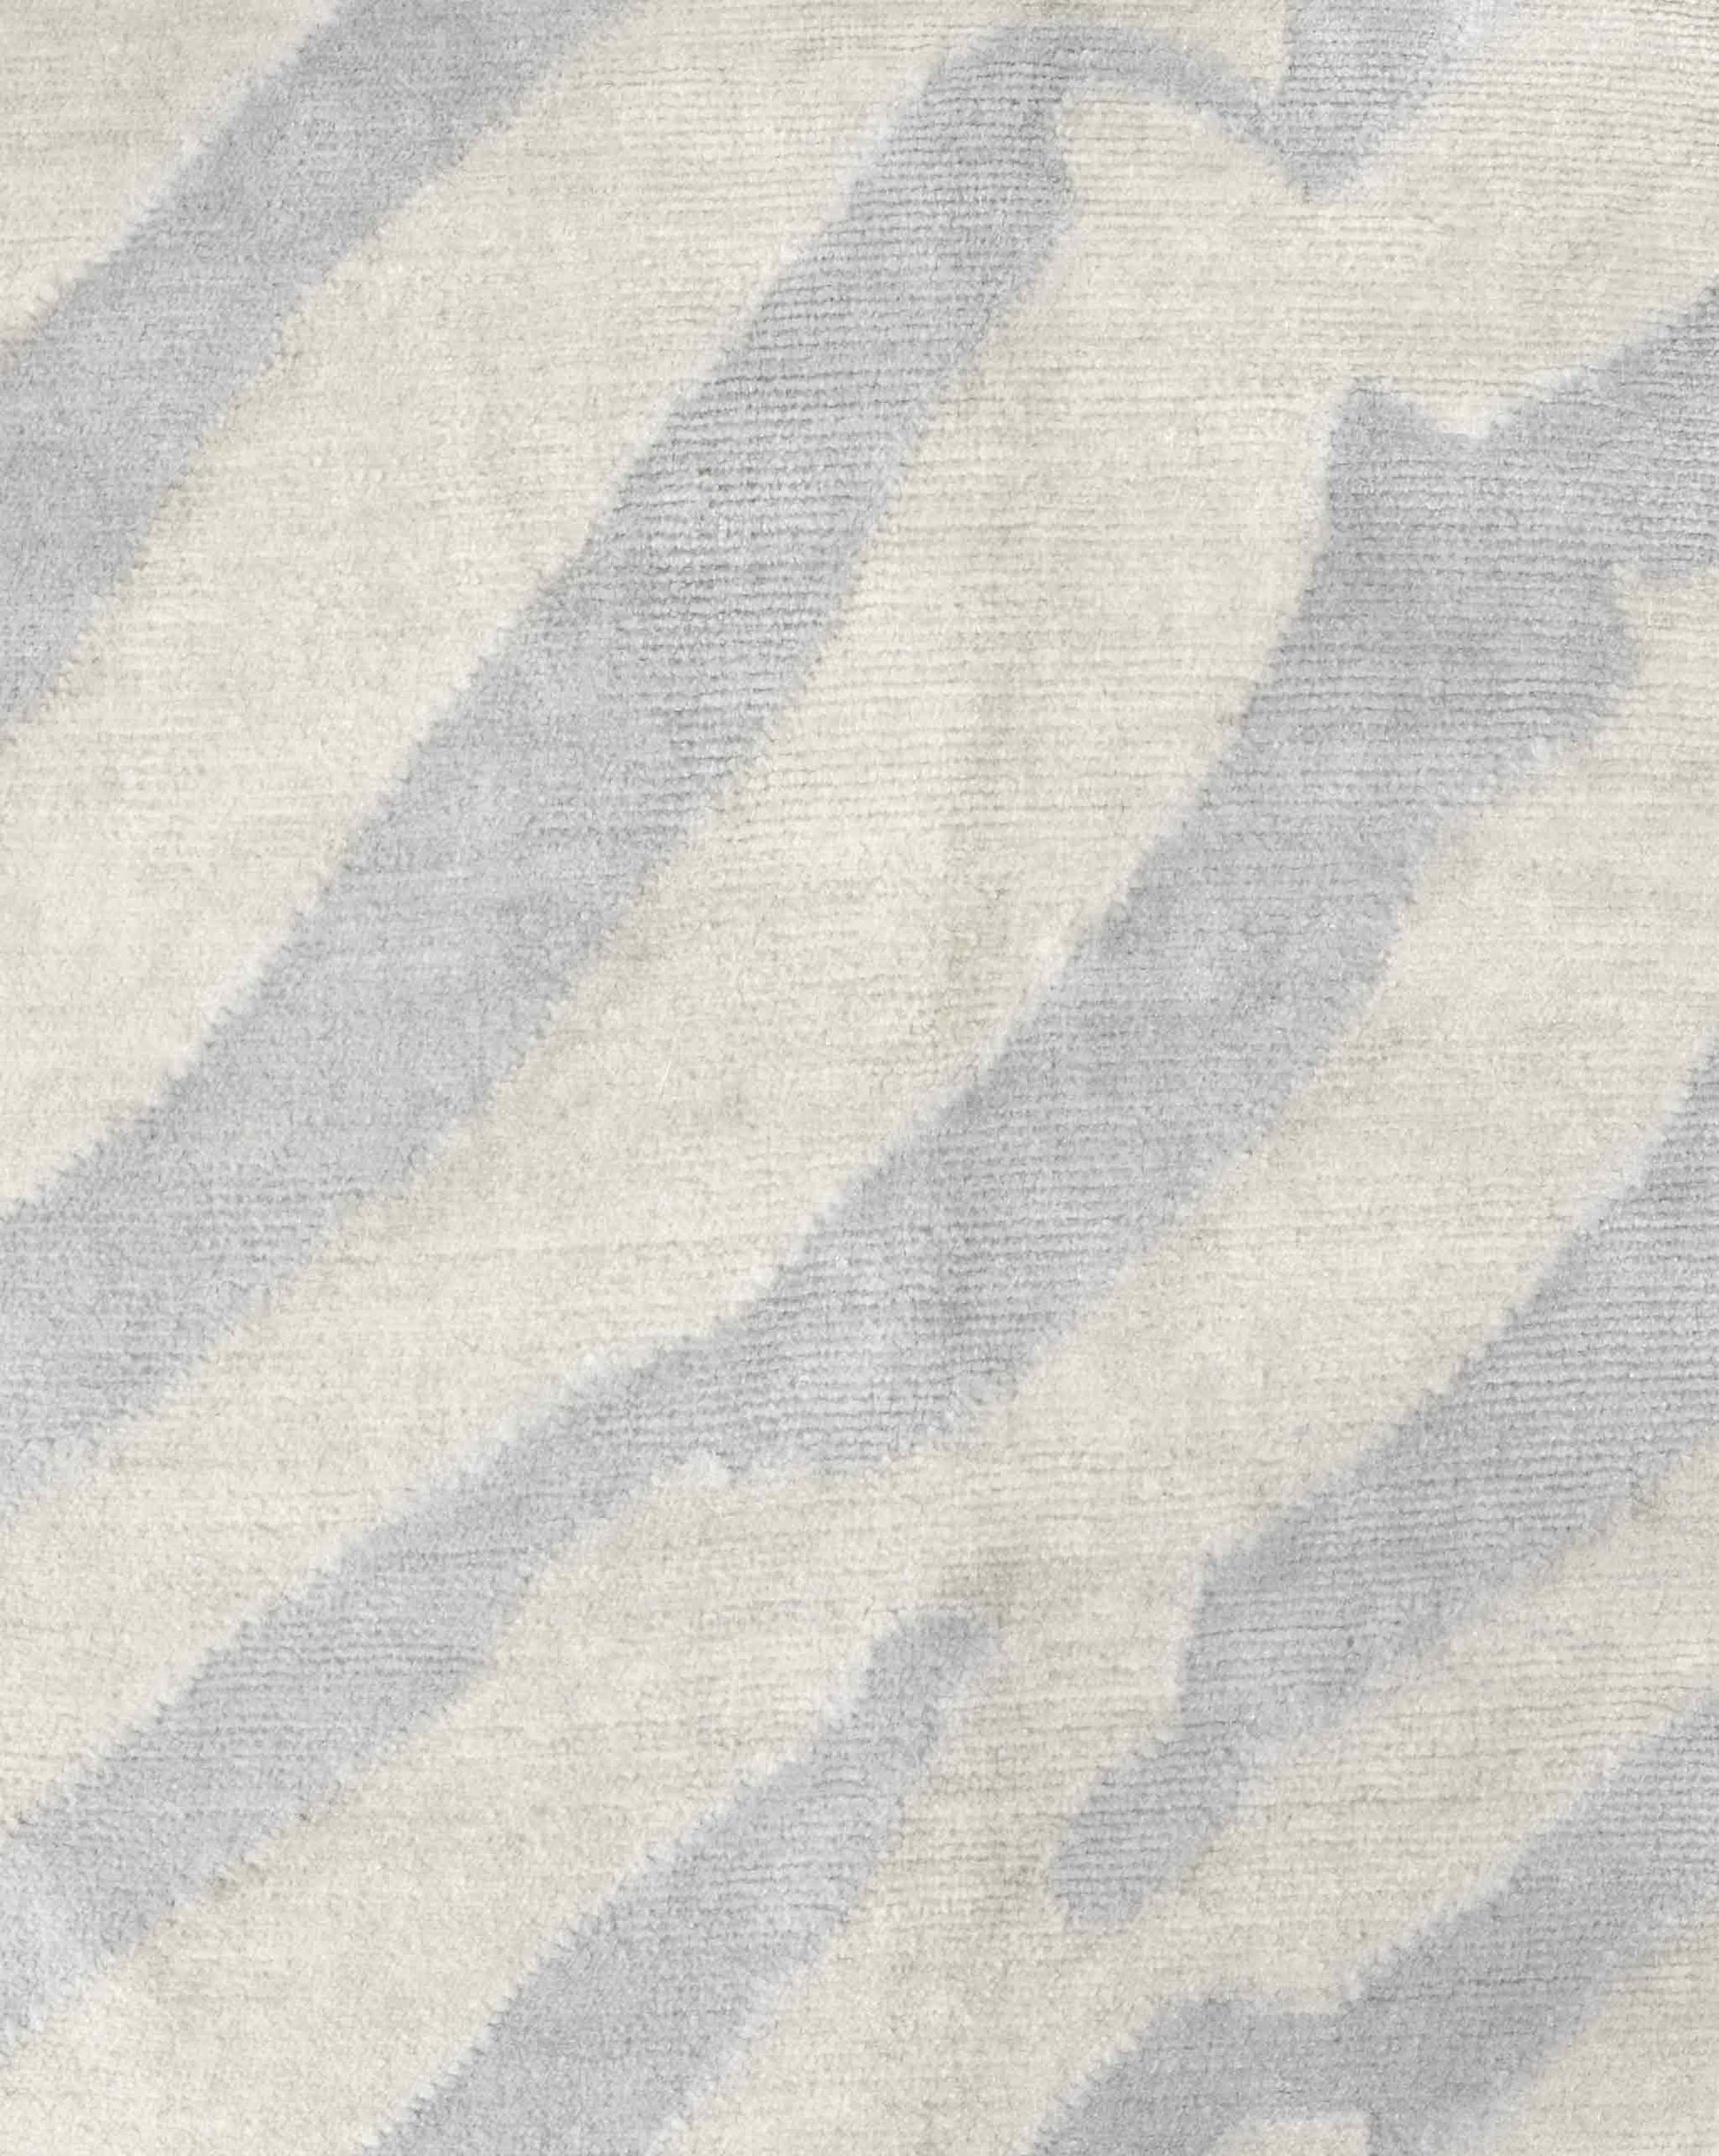 A close up image of the Sand Lines rug in Sand.